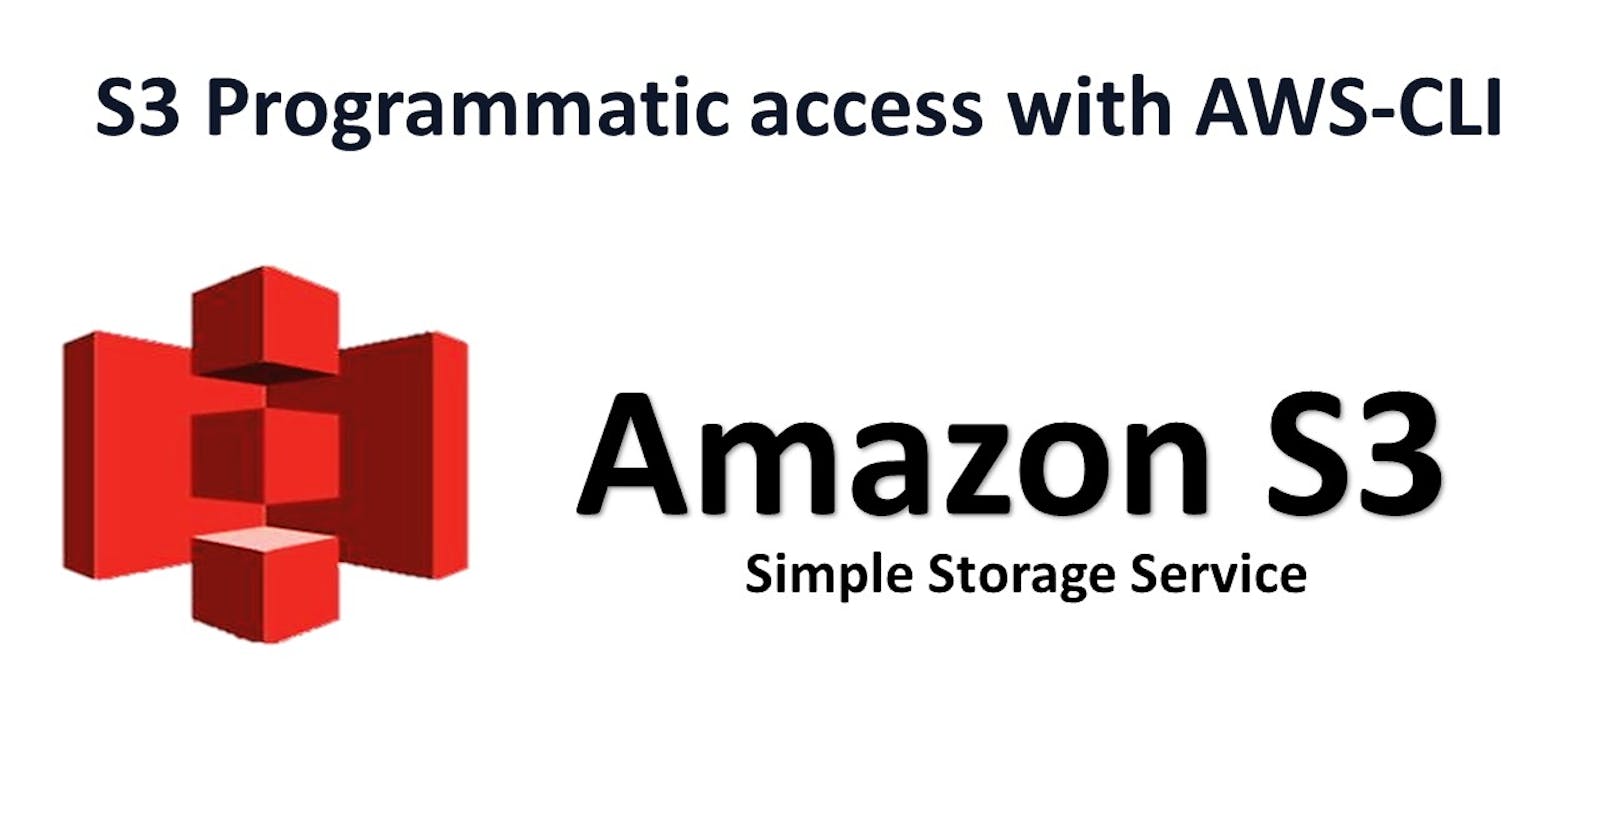 S3 Programmatic access with AWS-CLI